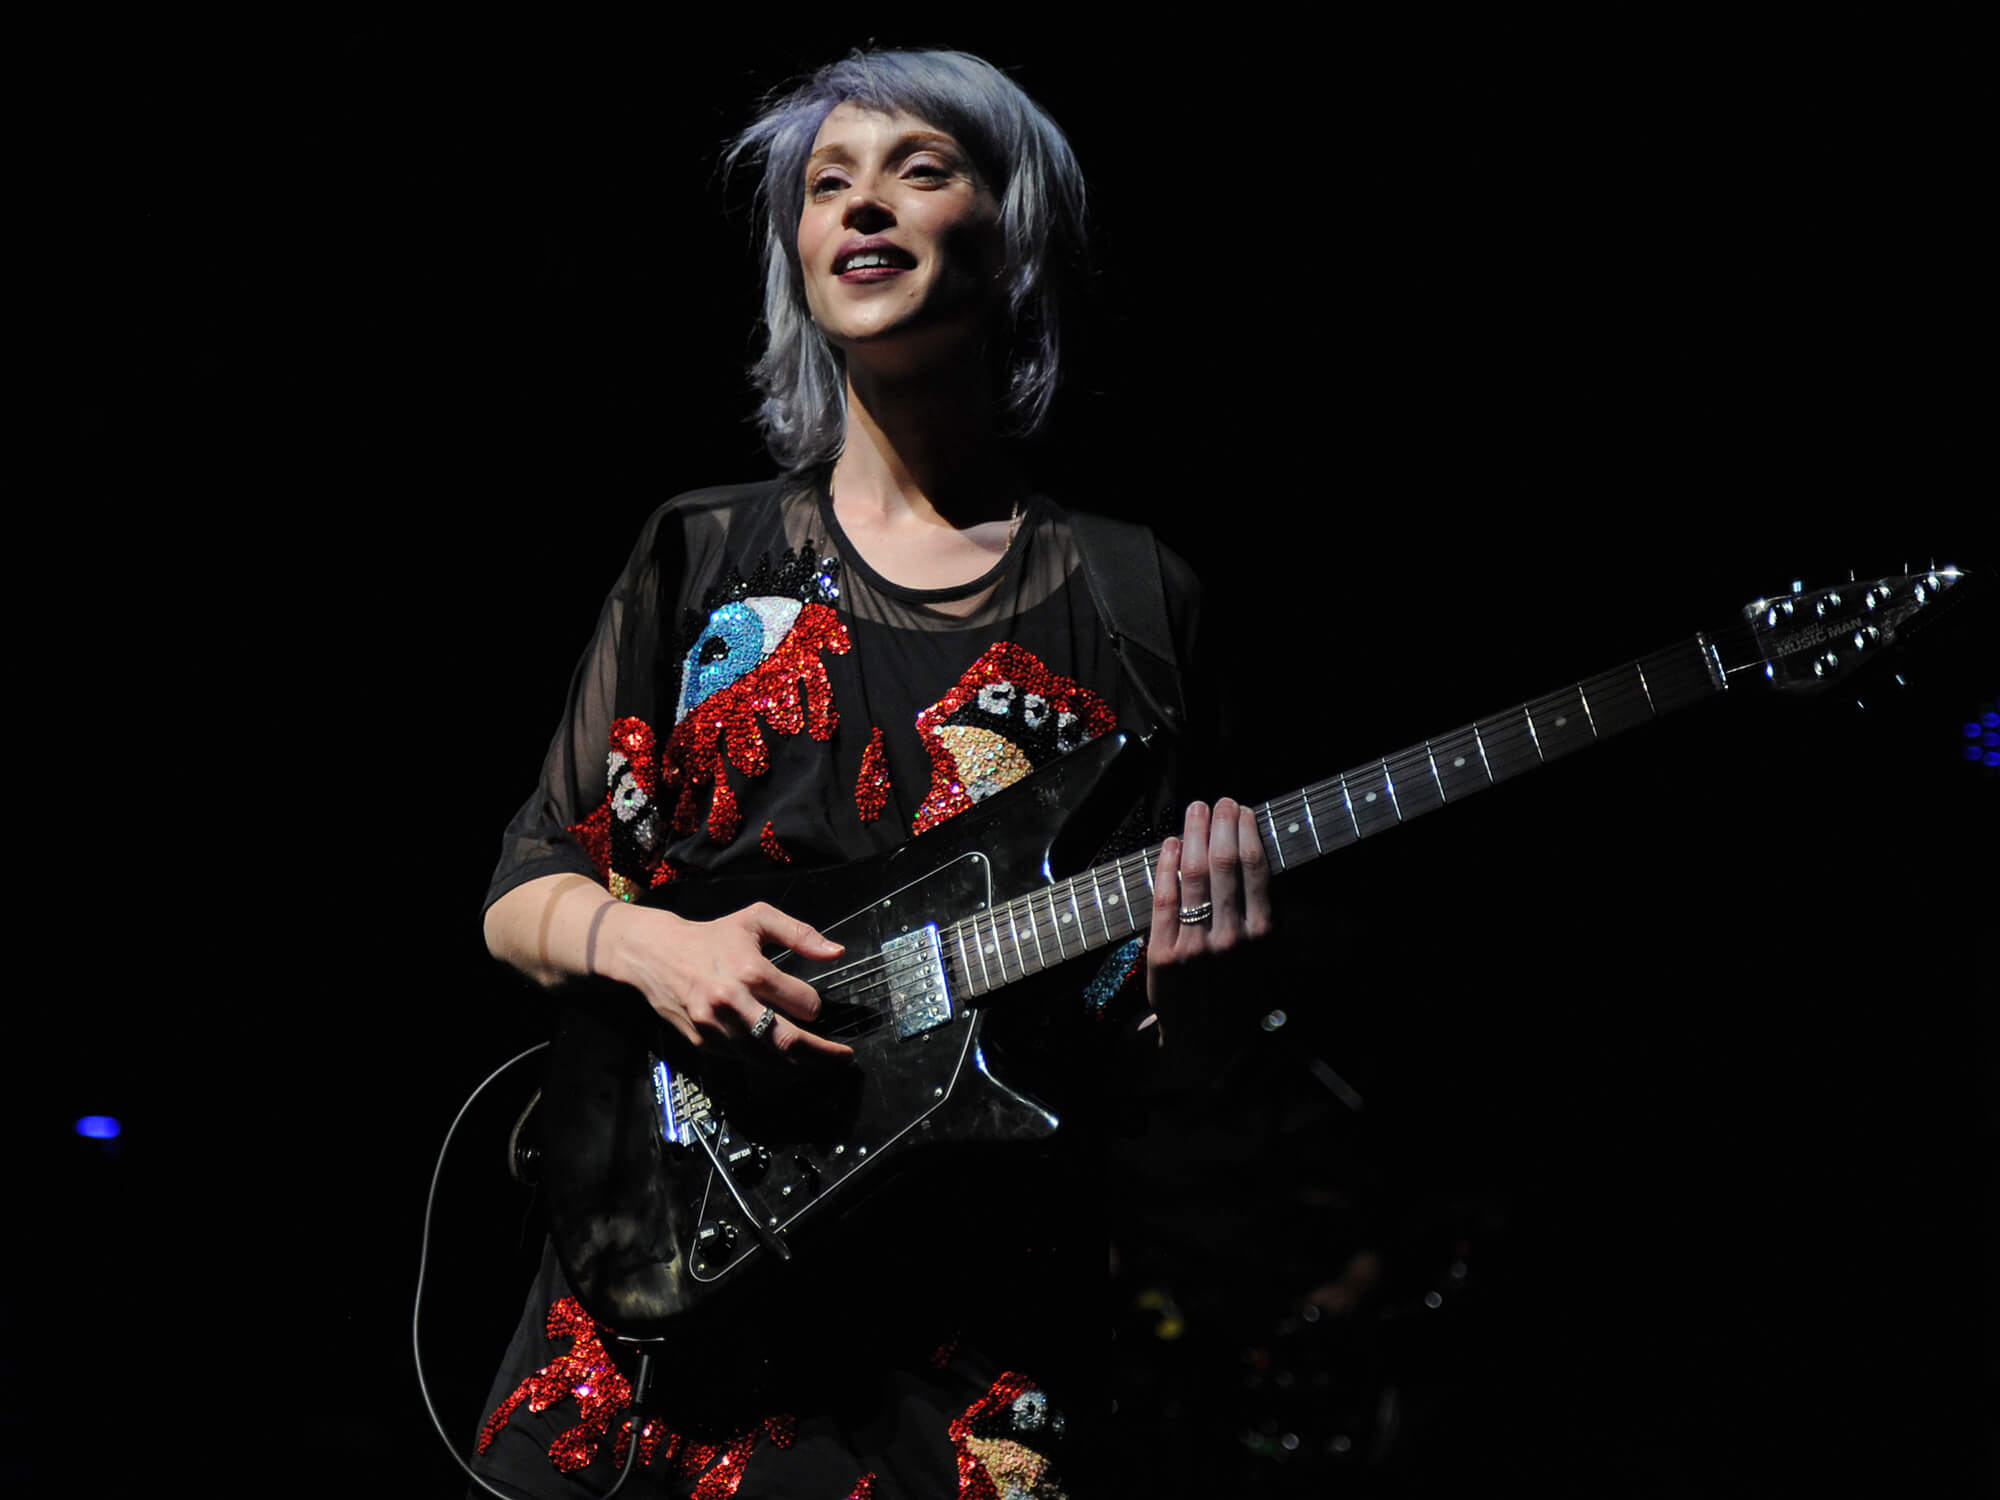 St Vincent performs at Fillmore Miami Beach on October 6, 2014 in Miami Beach, Florida.